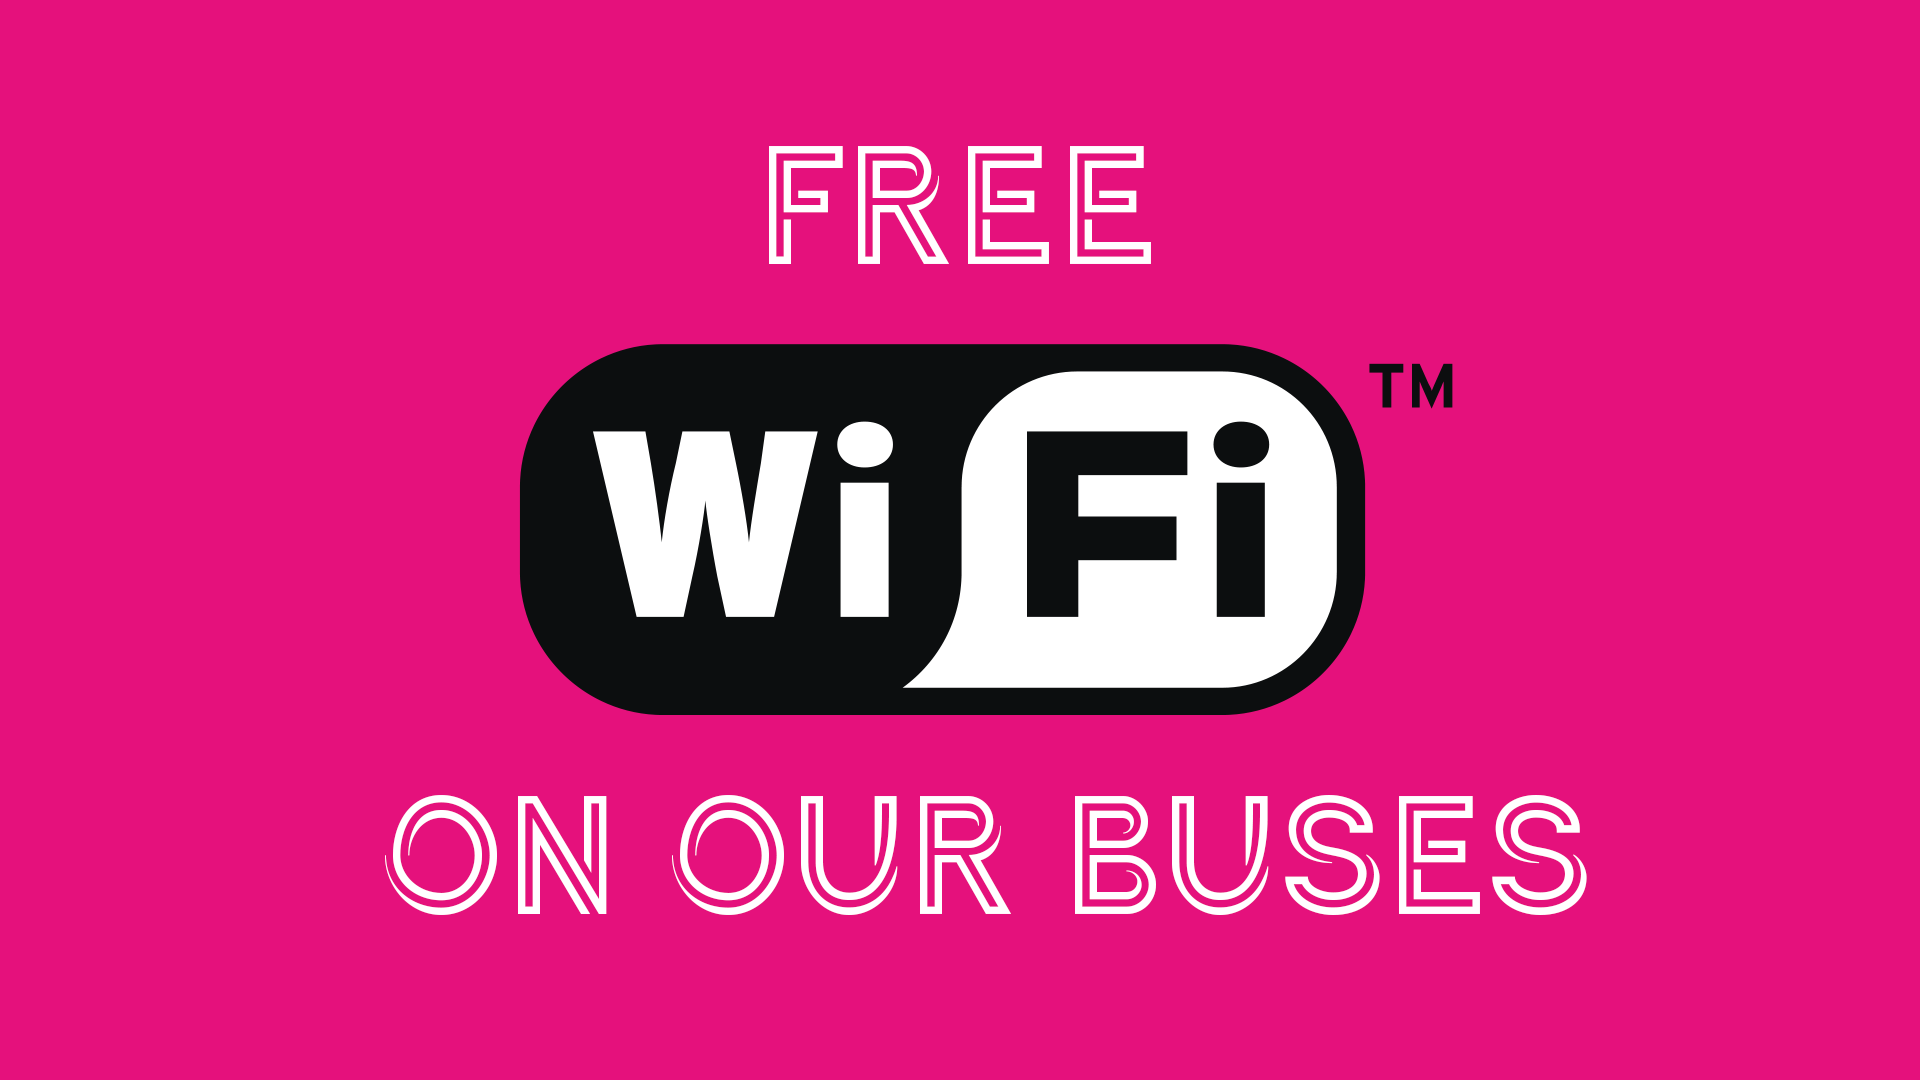 Free WiFi on our buses